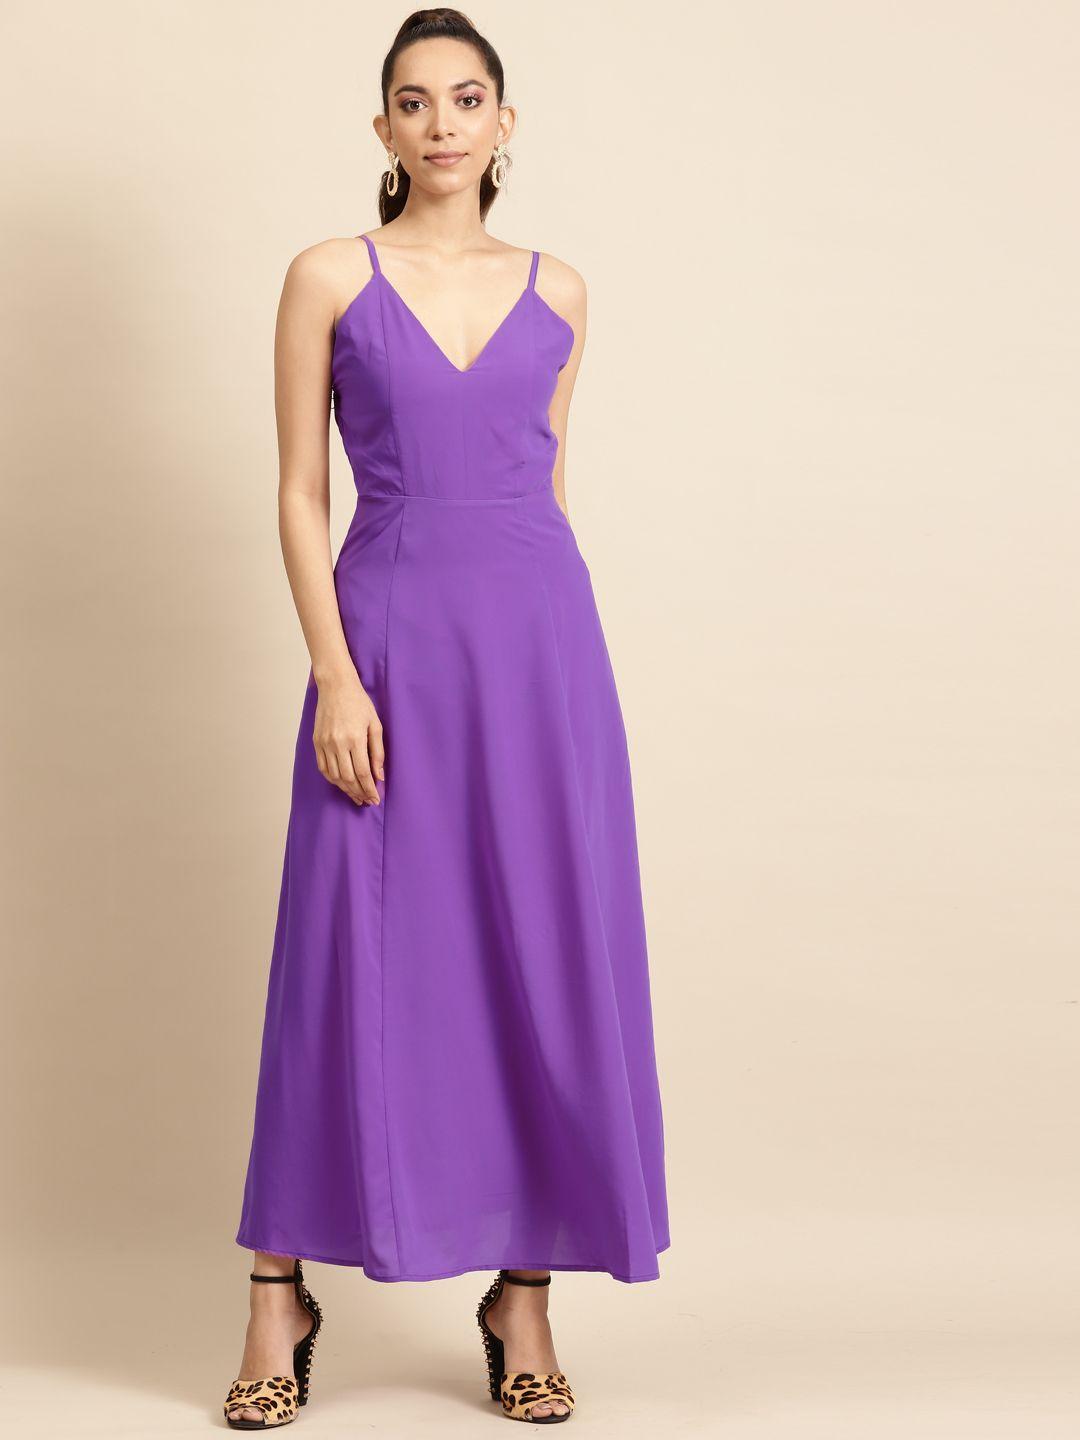 dodo-&-moa-purple-solid-gown-dress-with-tie-ups-at-back